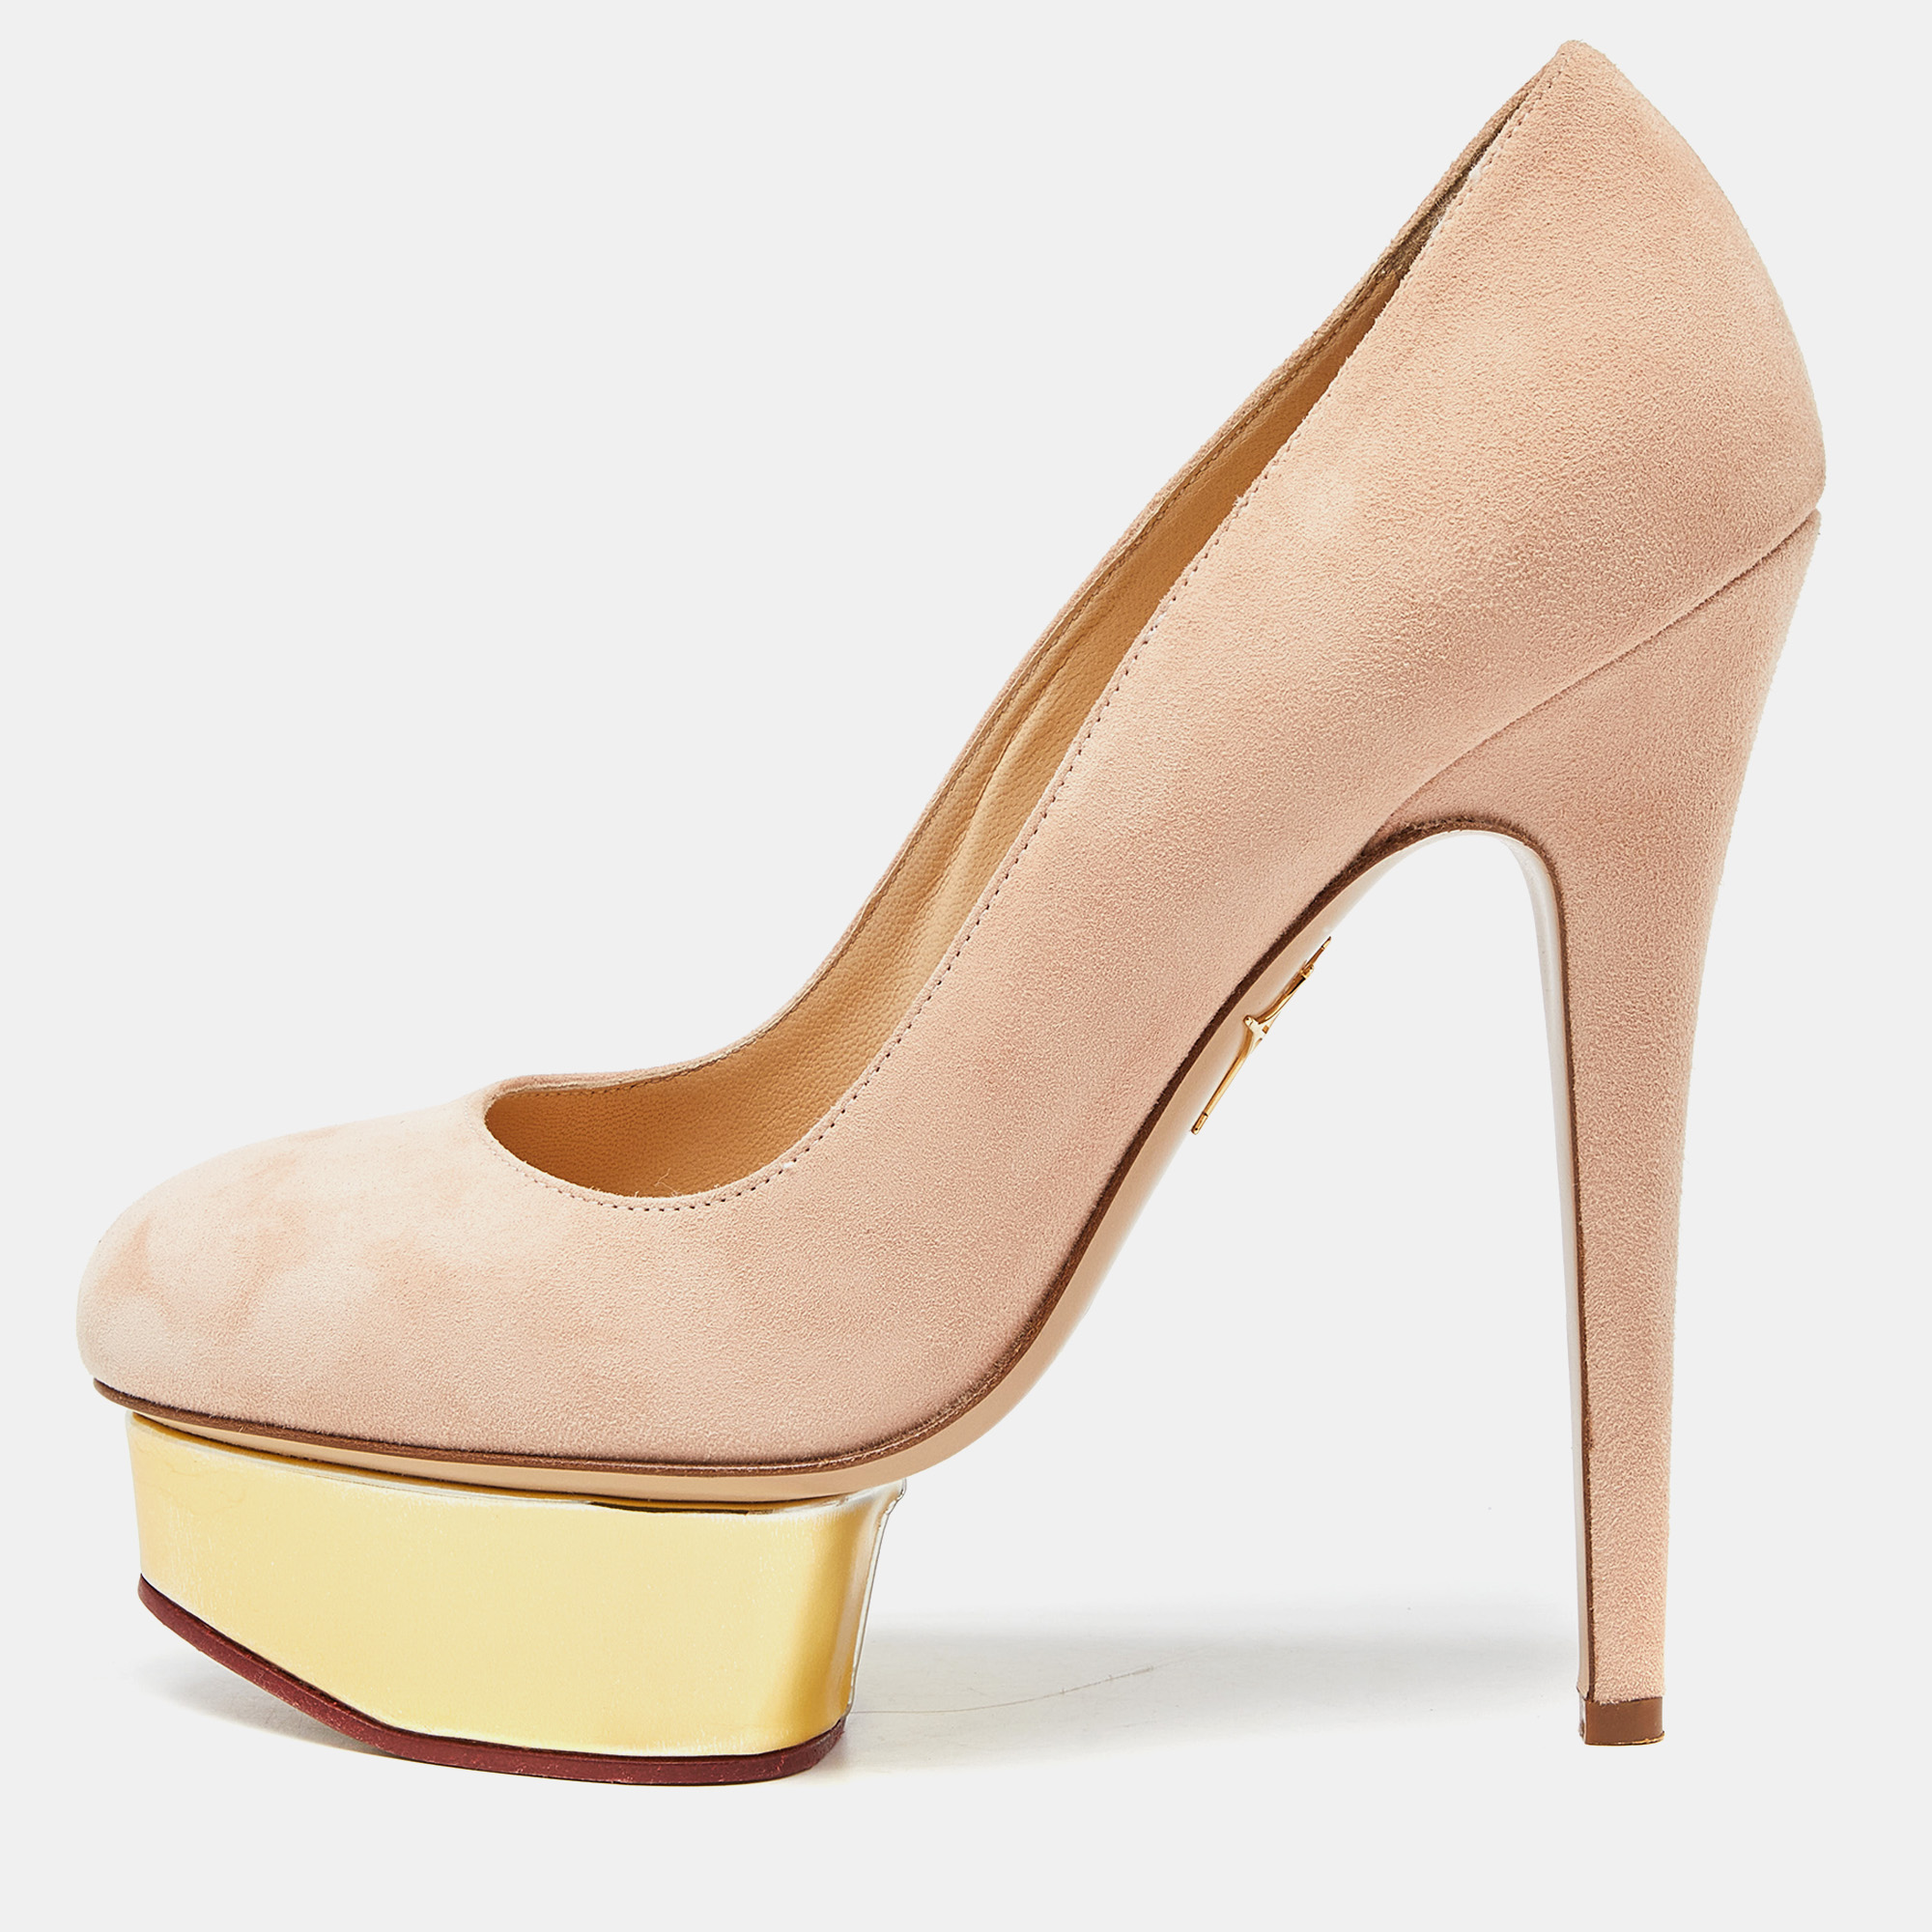 

Charlotte Olympia Beige Leather Dolly Platform Pumps Size